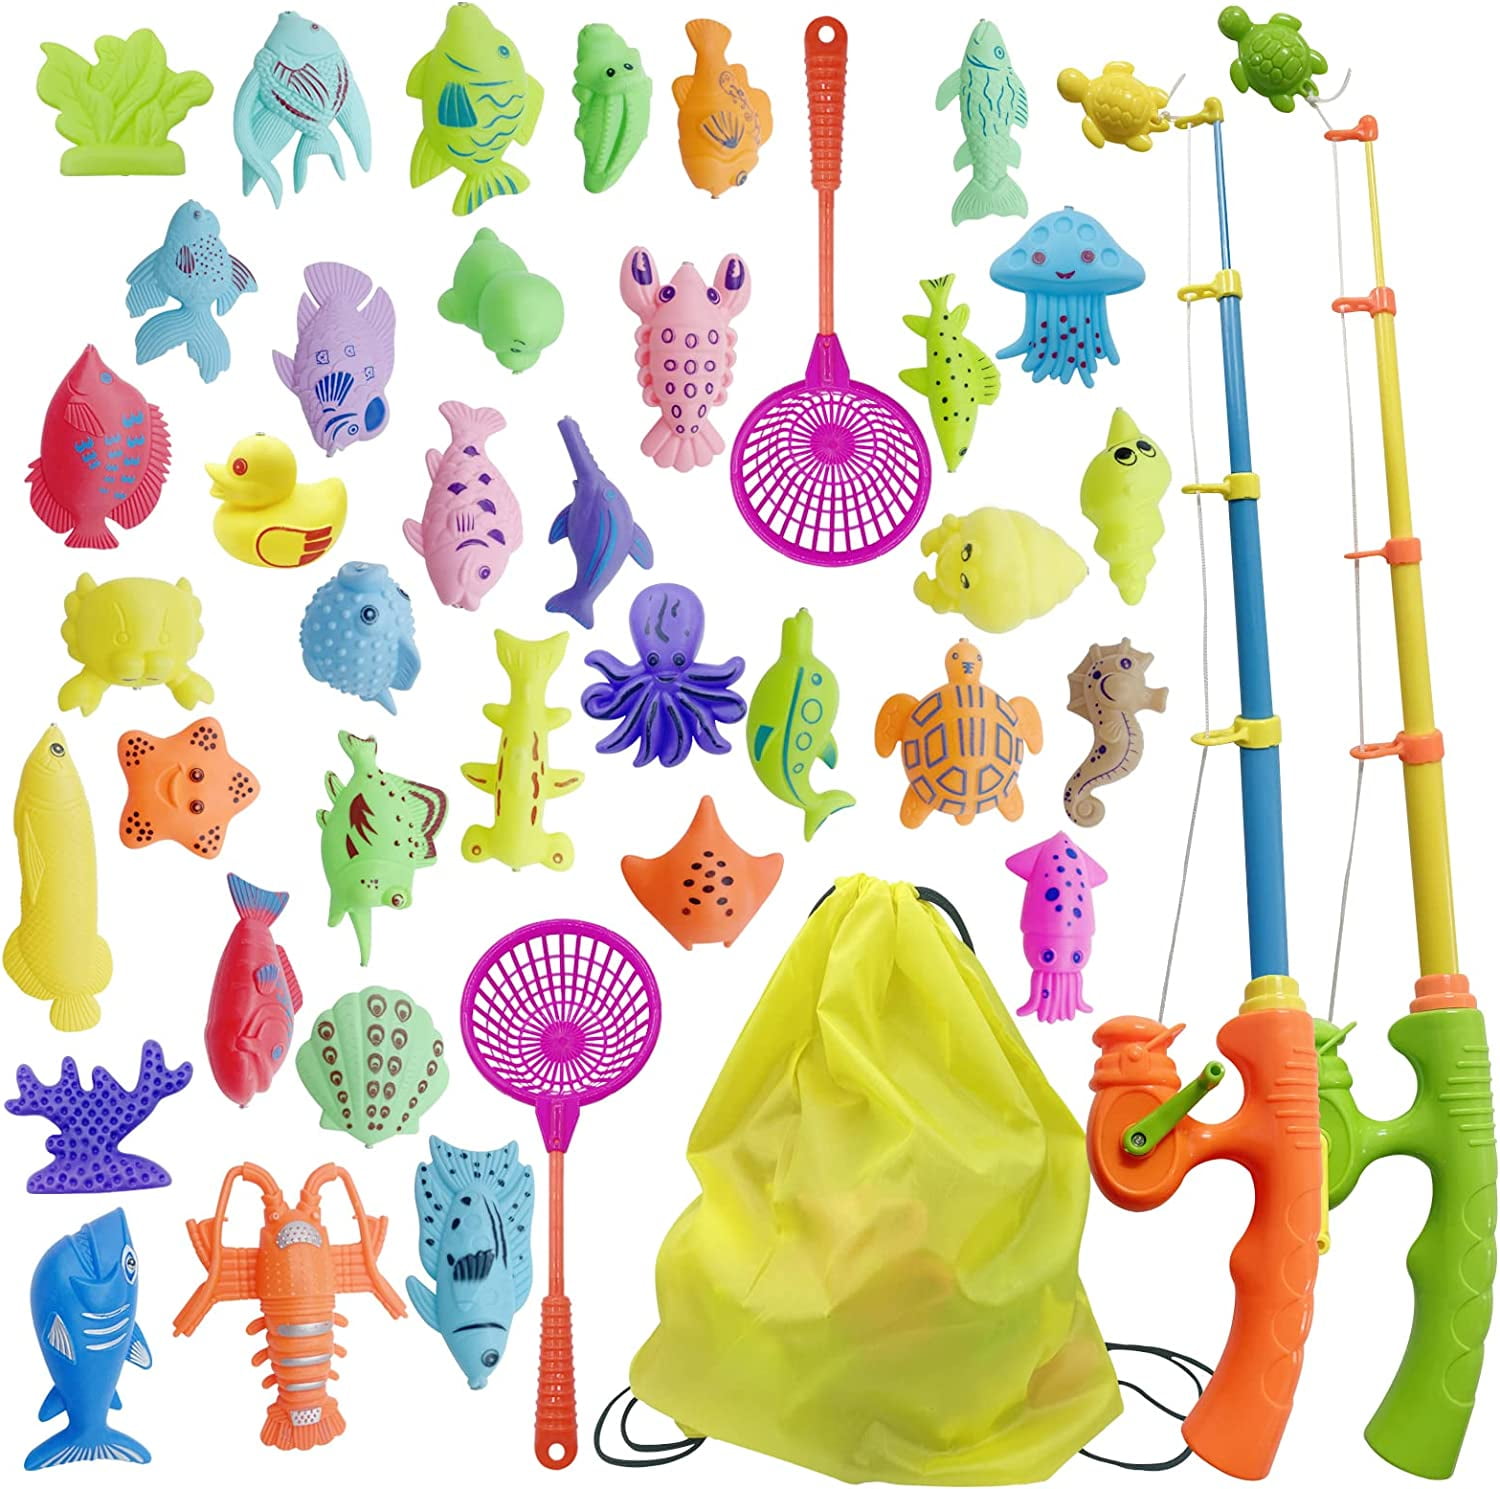 Kids Fishing Bath Toys Game - Magnetic Floating Toy Magnet Pole Rod Net,  Plastic Floating Fish - Toddler Education Teaching and Learning Colors  Ocean Sea Animals 3 4 5 6 Year Old 